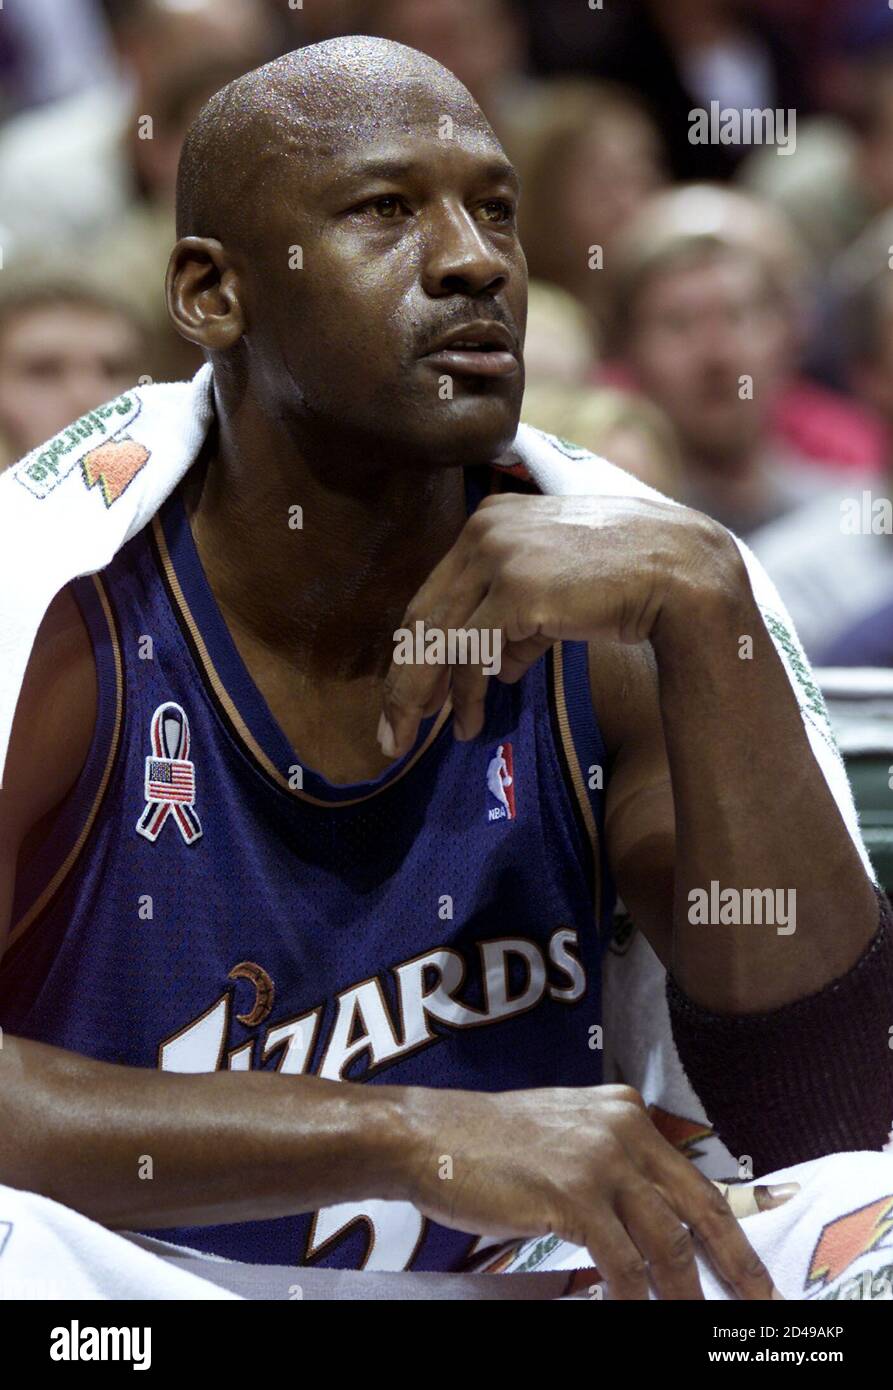 Washington Wizards' forward Michael Jordan takes a break and watches from  the bench late in the first quarter at the Bradley Center in Milwaukee,  Wisconsin January 11, 2002. Jordan scored 22 points,